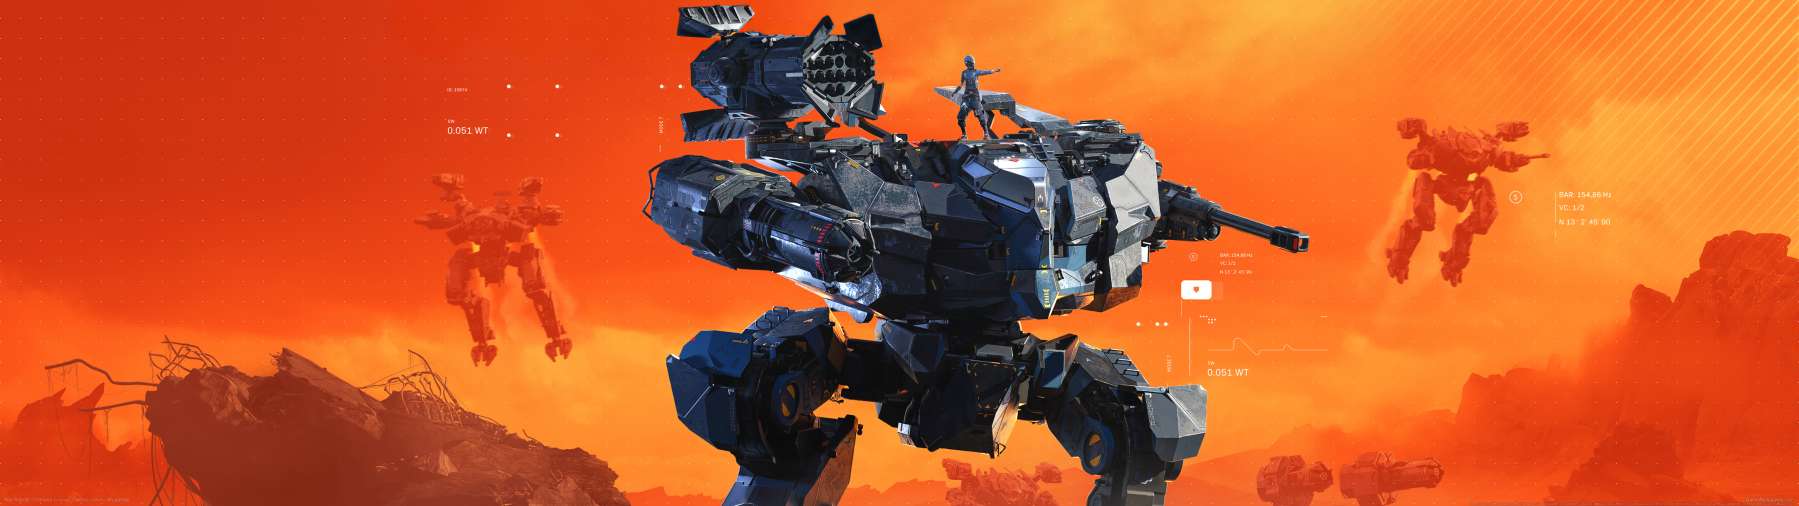 War Robots: Frontiers superwide wallpaper or background 01